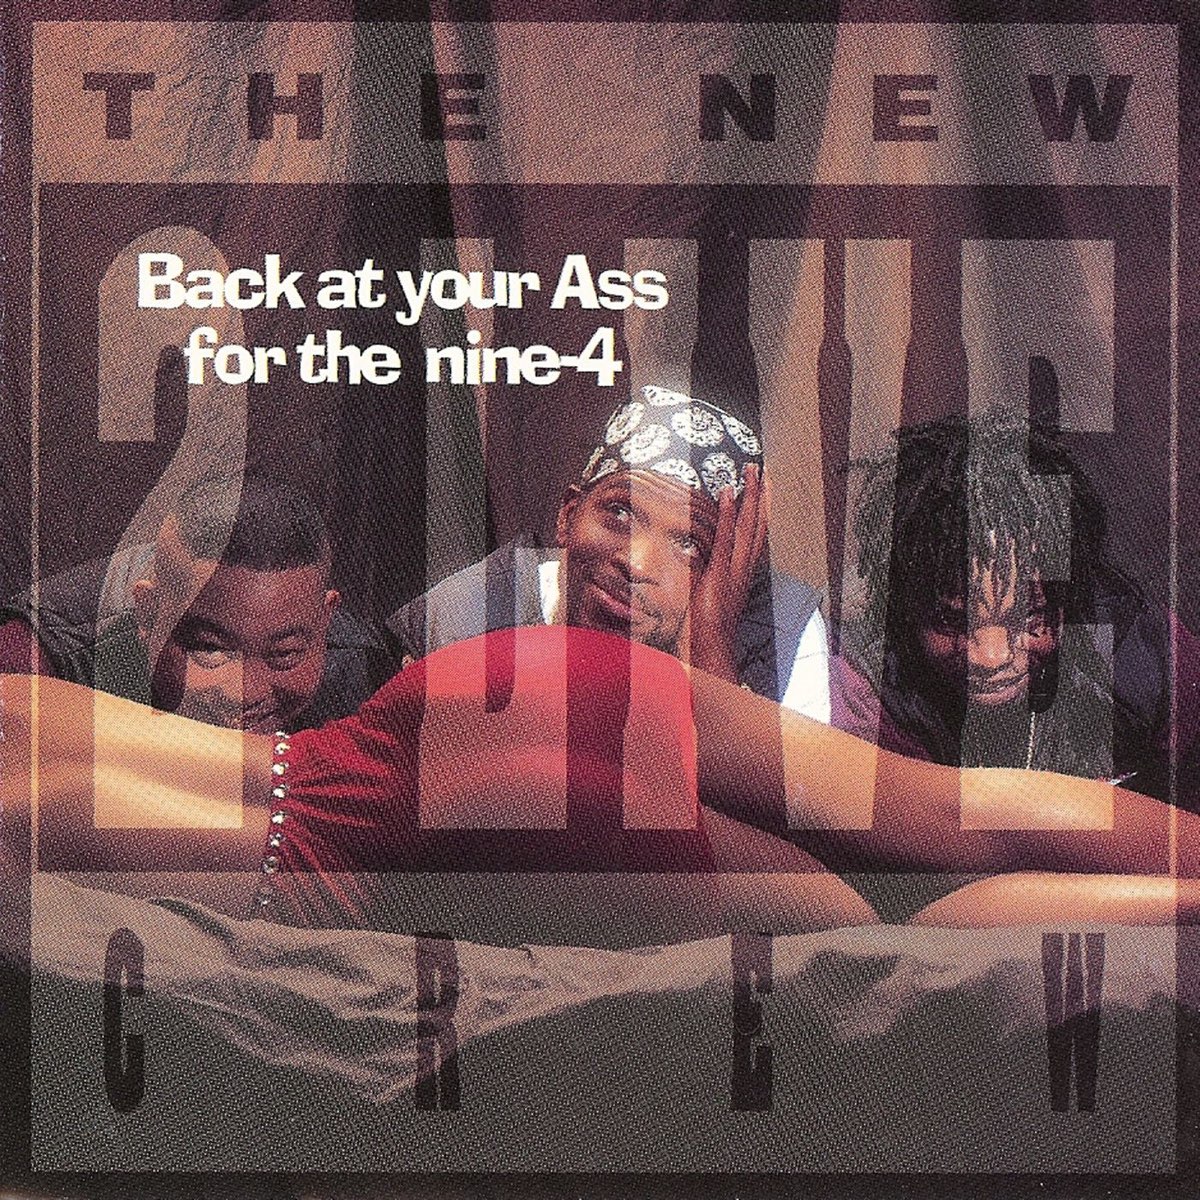 The New 2 Live Crew 的 专 辑(Back At Your Ass for the Nine-4) .